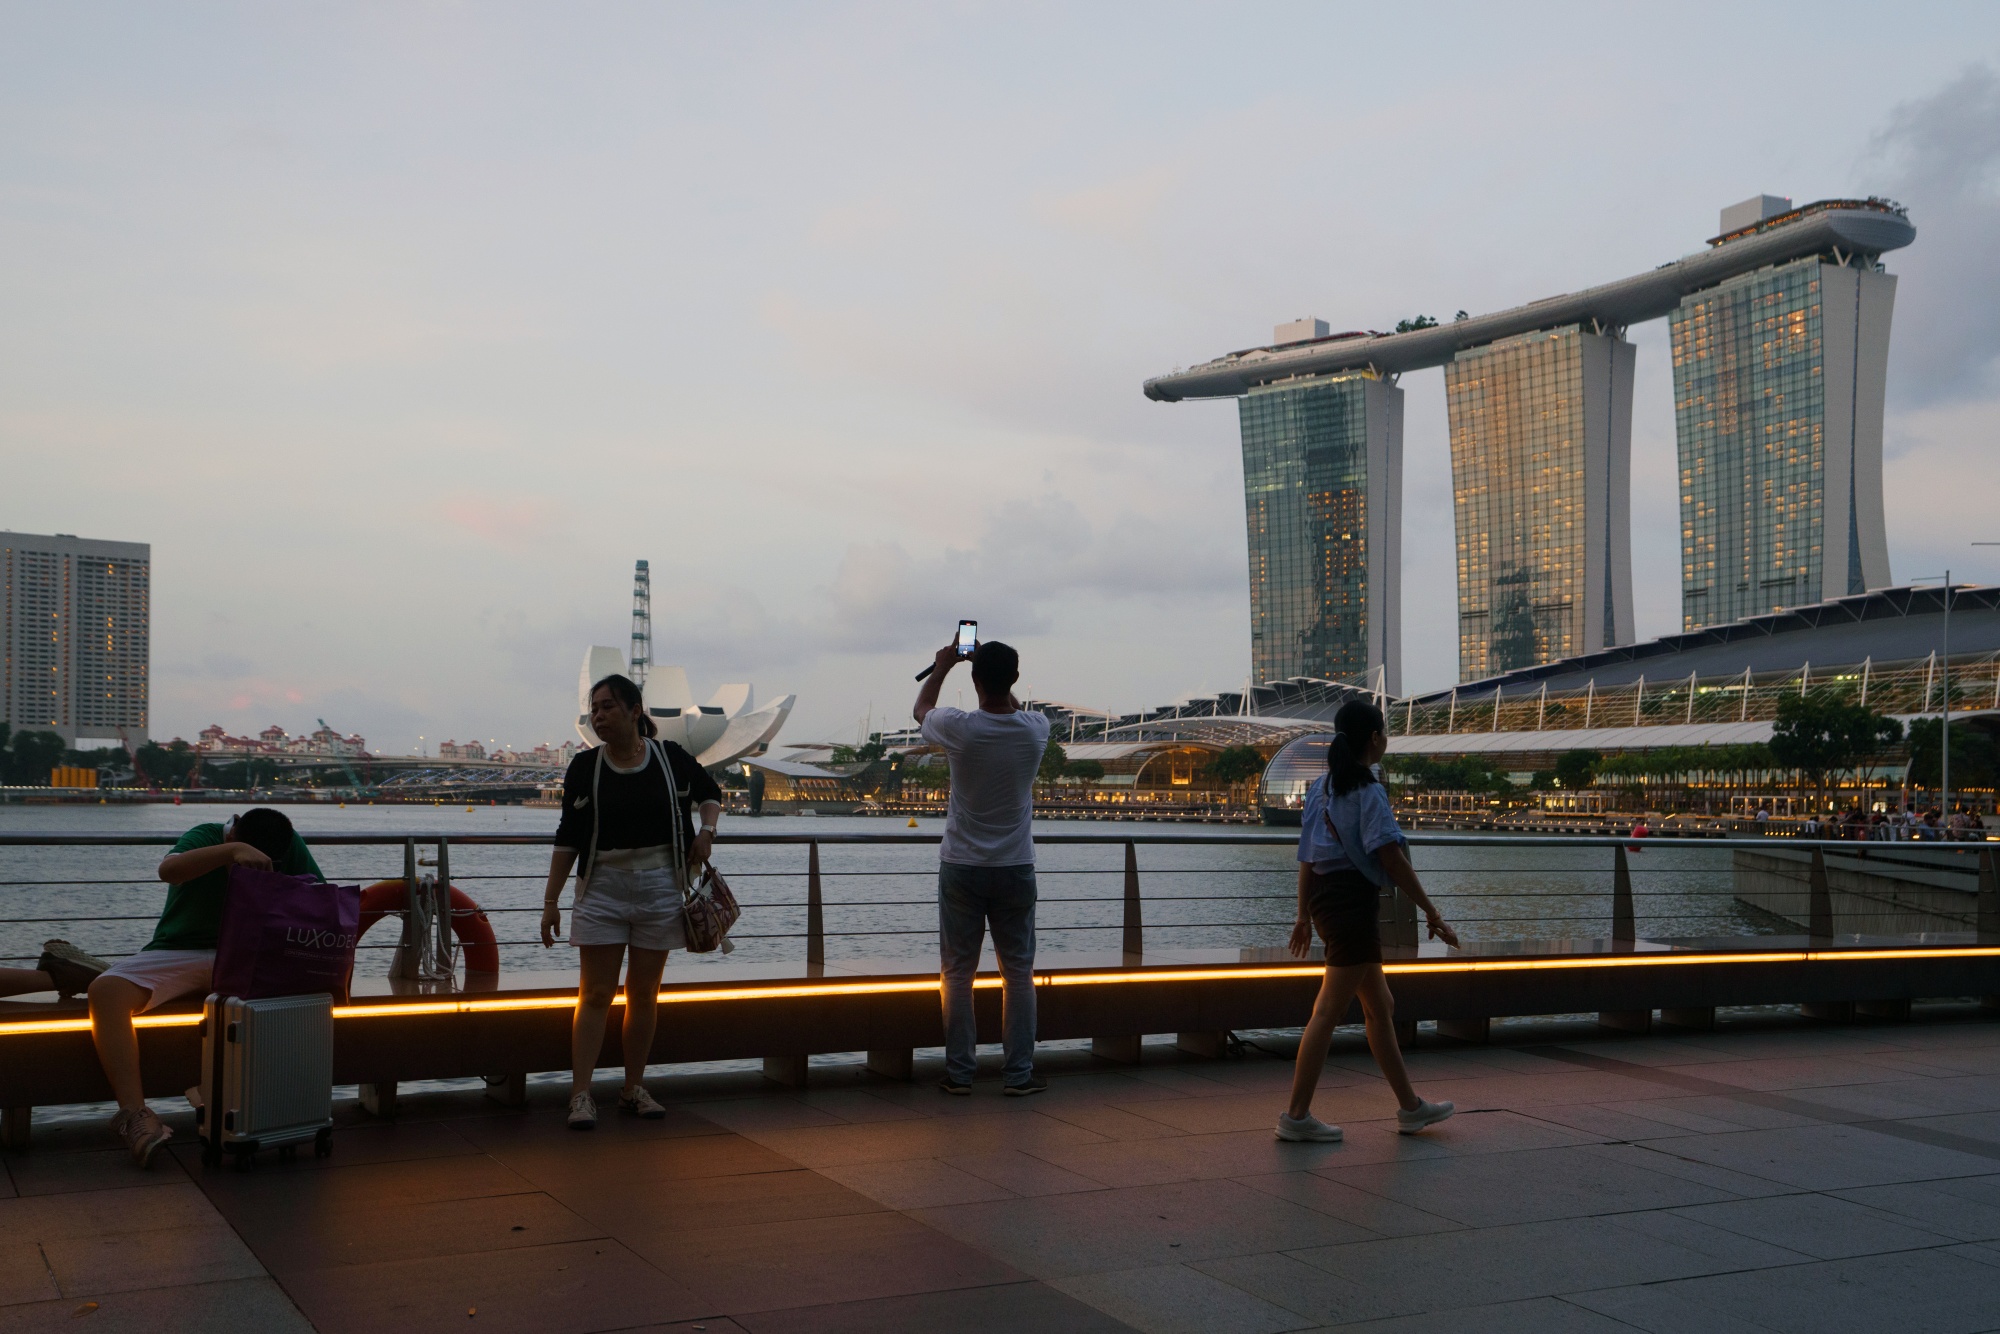 General Views of Singapore as City-State Keeps Monetary Policy Tight as Price Risks Linger